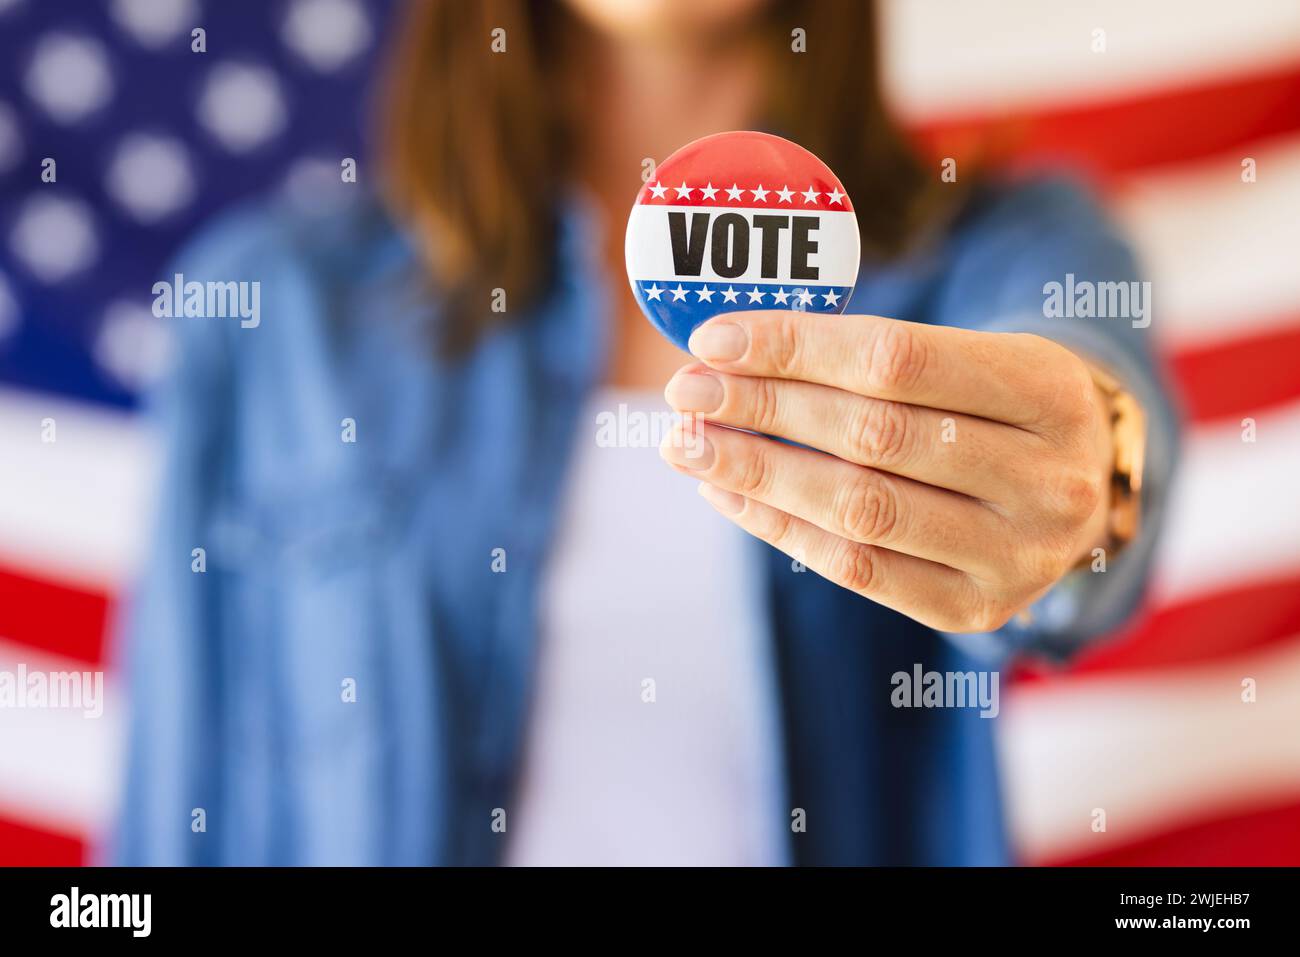 A caucasian woman is holding out a vote badge towards the camera, with copy space unaltered Stock Photo